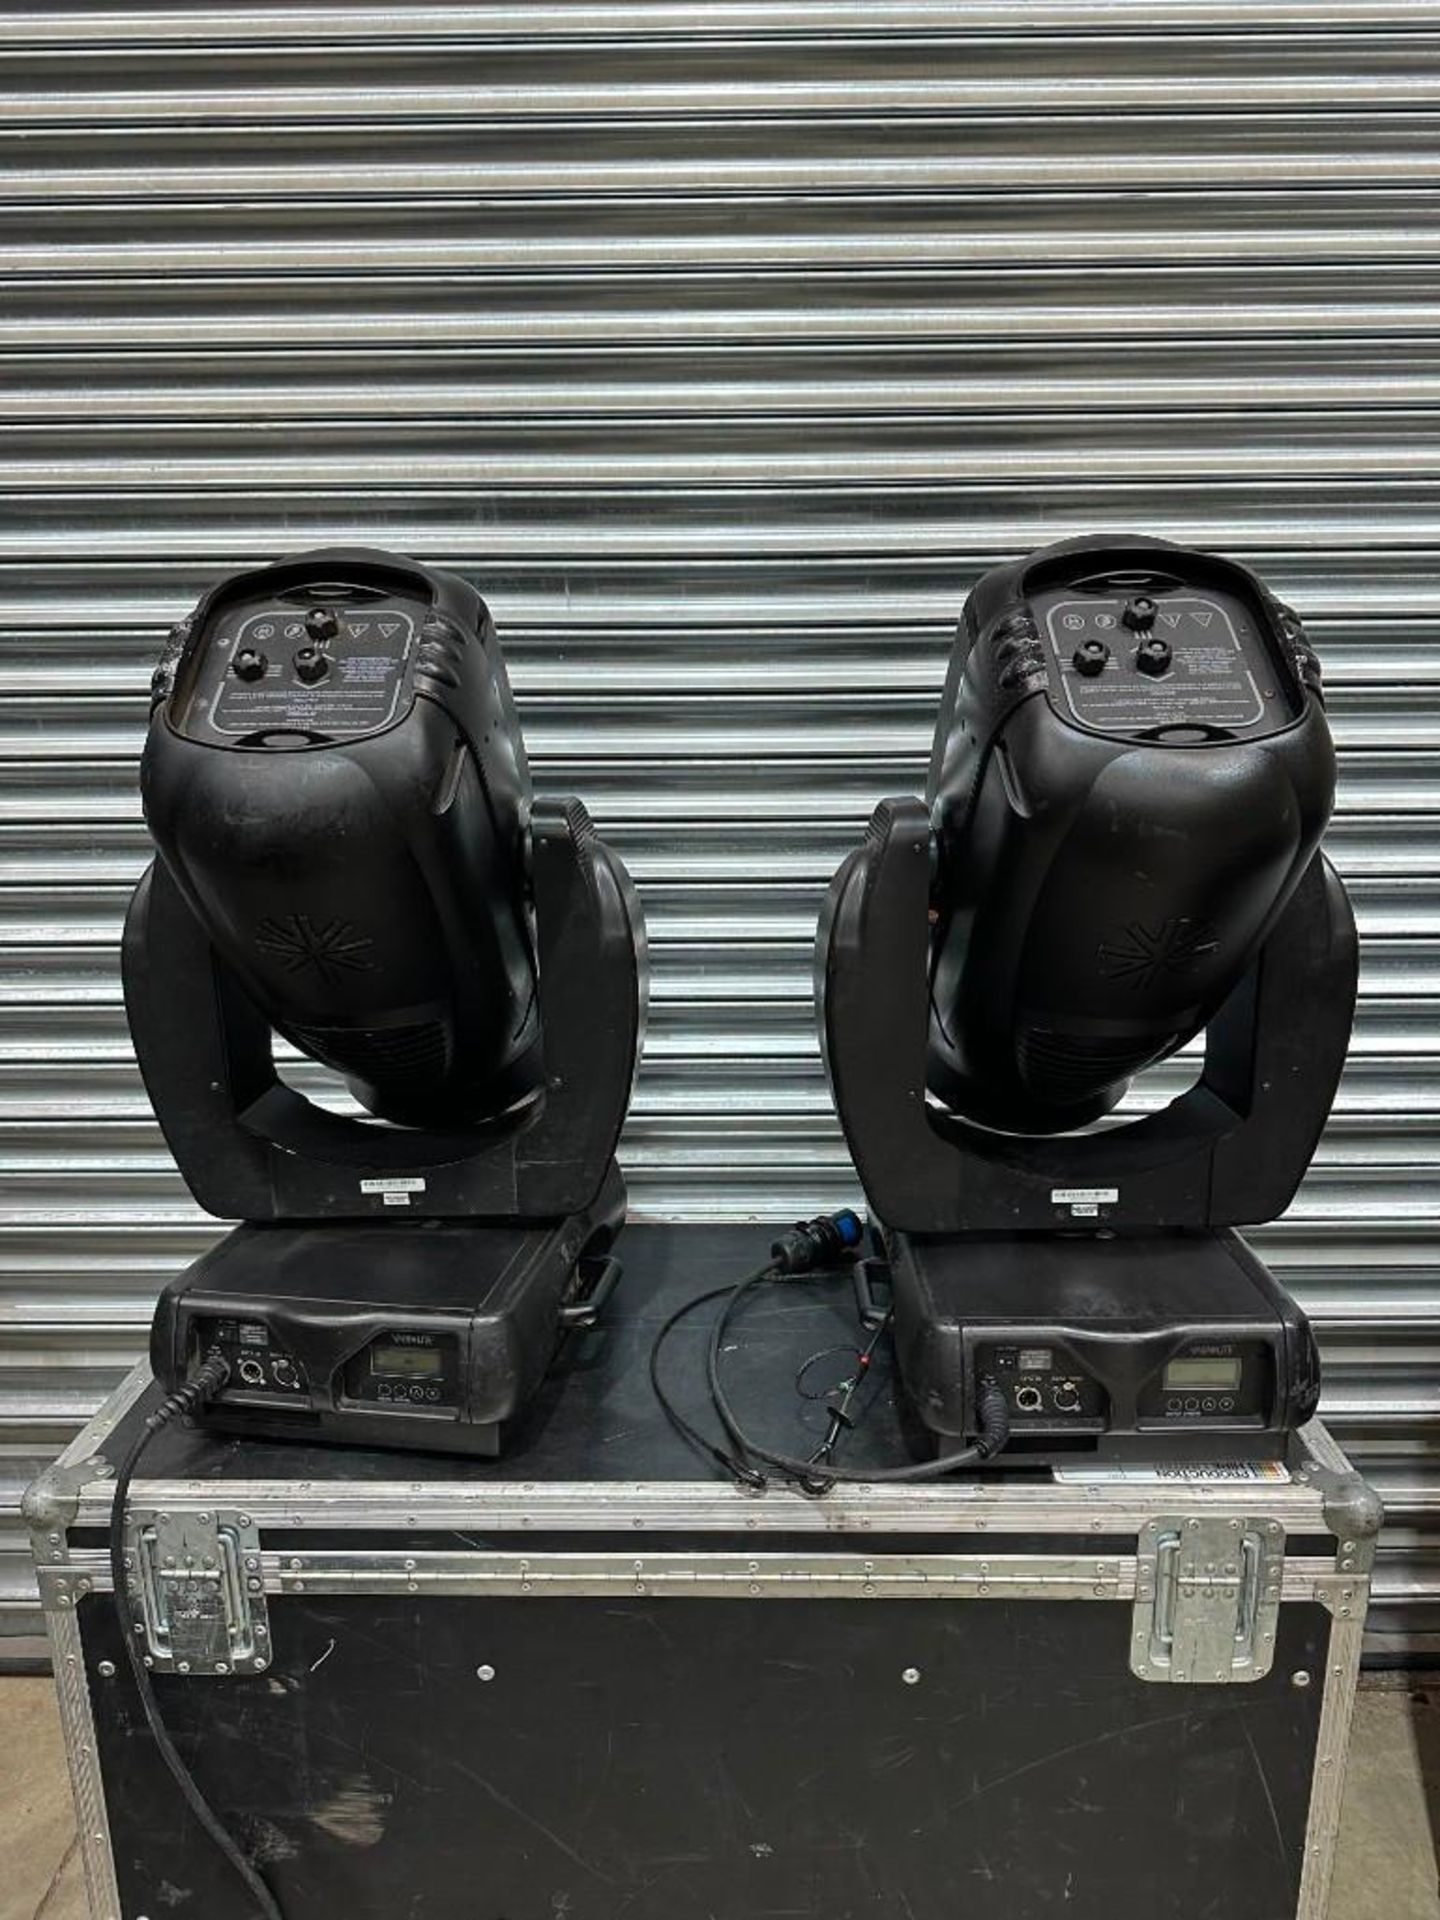 Varilite VL3500 Wash FX -Sold as a Single in a flightcase. - The VL3500 Wash FX luminaire features i - Image 6 of 8